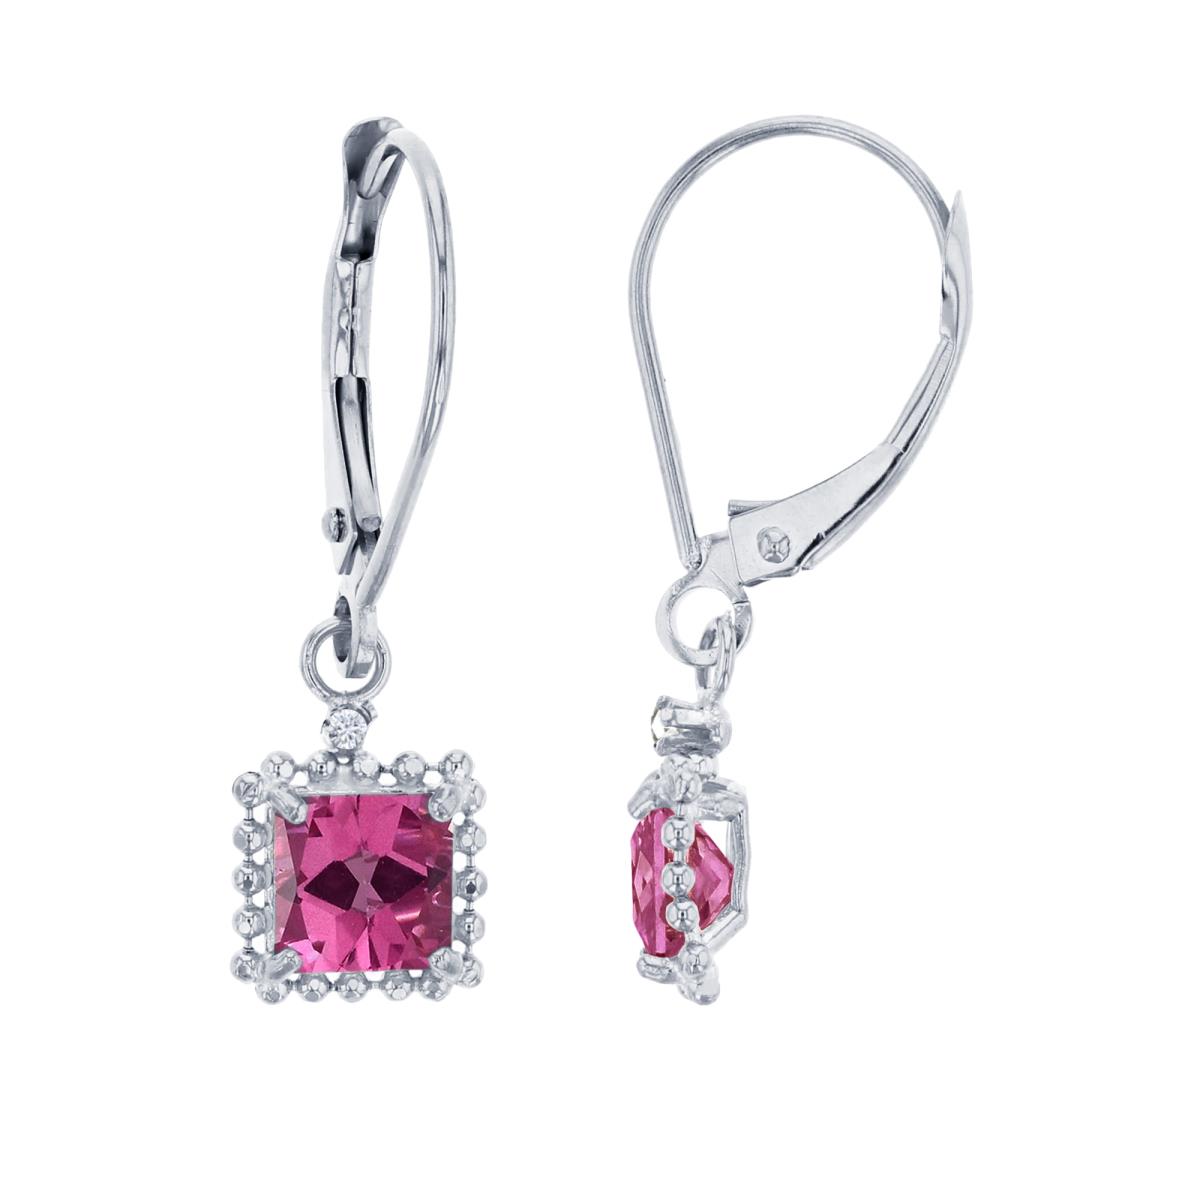 14K White Gold 1.25mm Rd Created White Sapphire & 5mm Sq Pure Pink Bead Frame Drop Lever-Back Earring